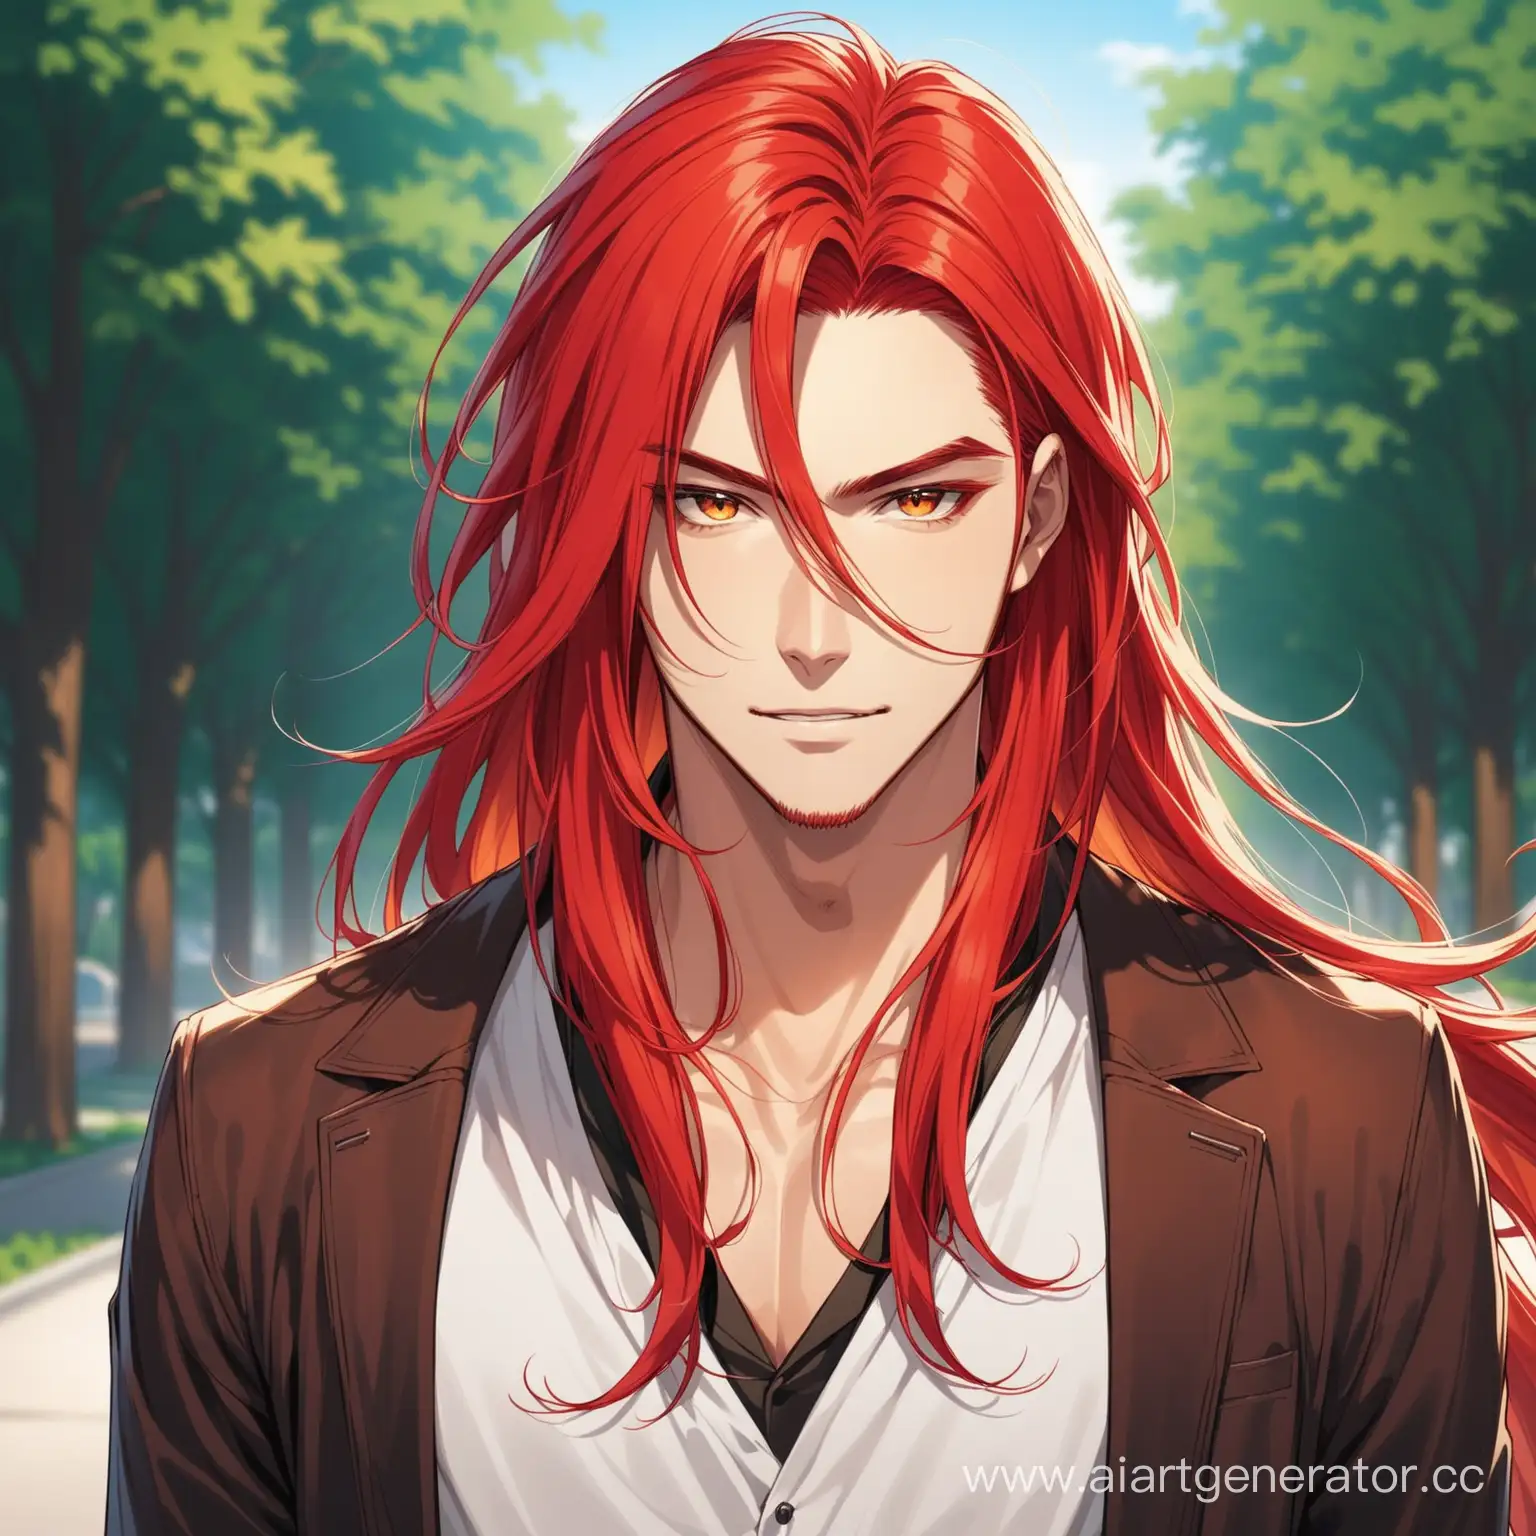 Vibrant-RedHaired-Man-with-Distinctive-Locks